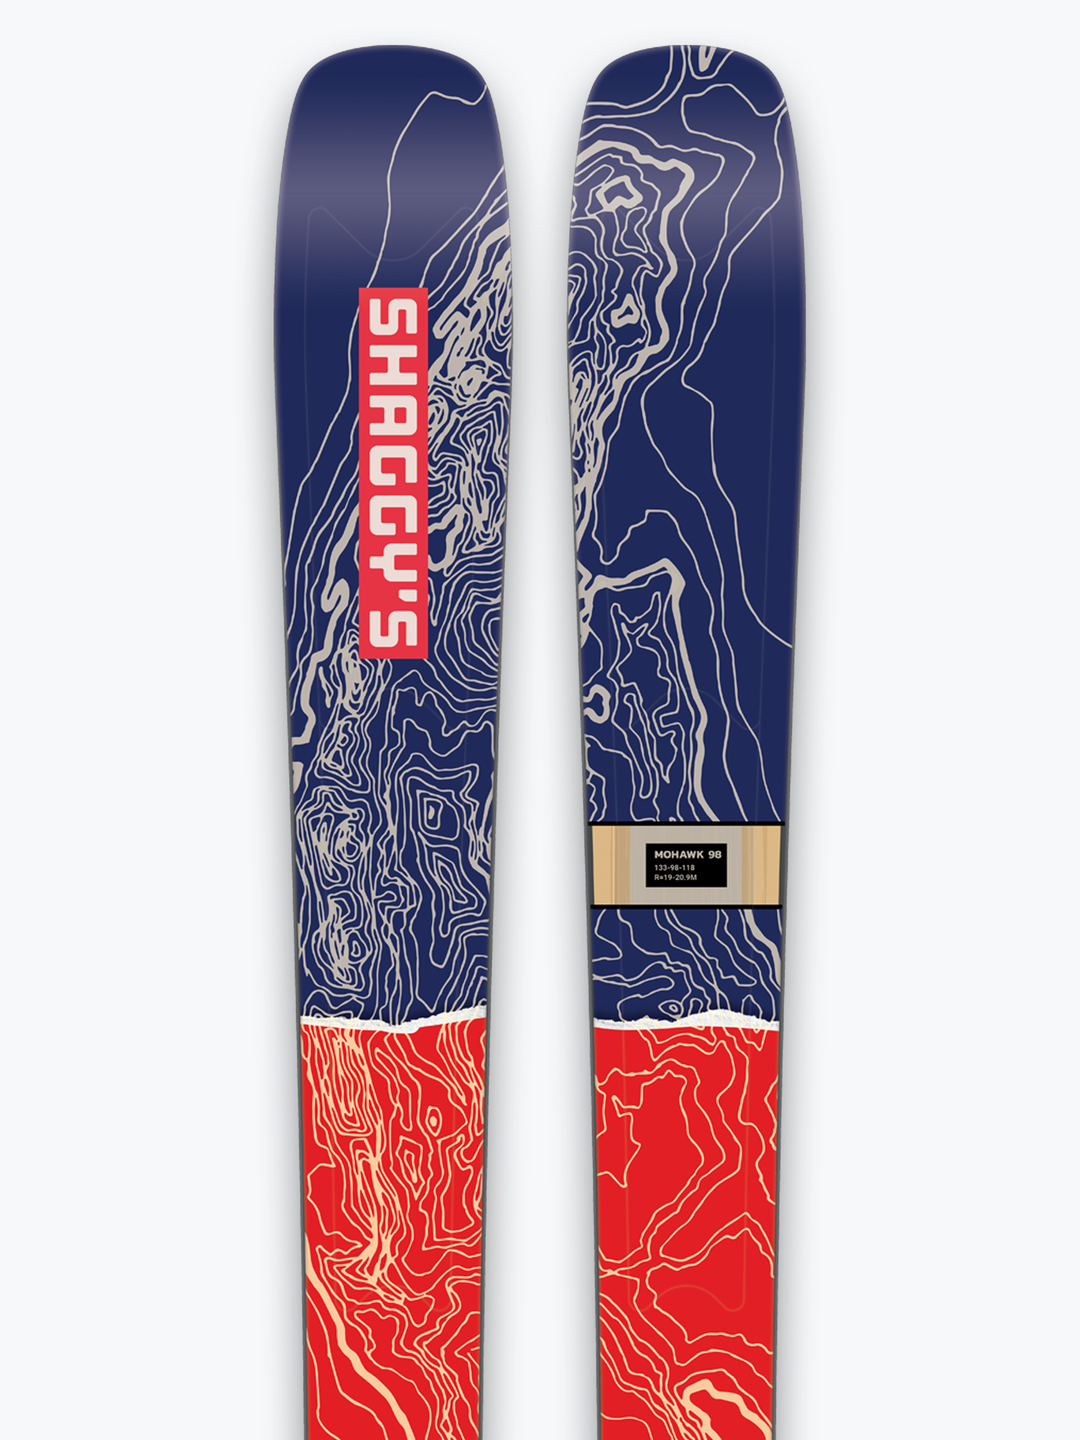 Mohawk 98 - FC1 – Shaggy's Copper Country Skis